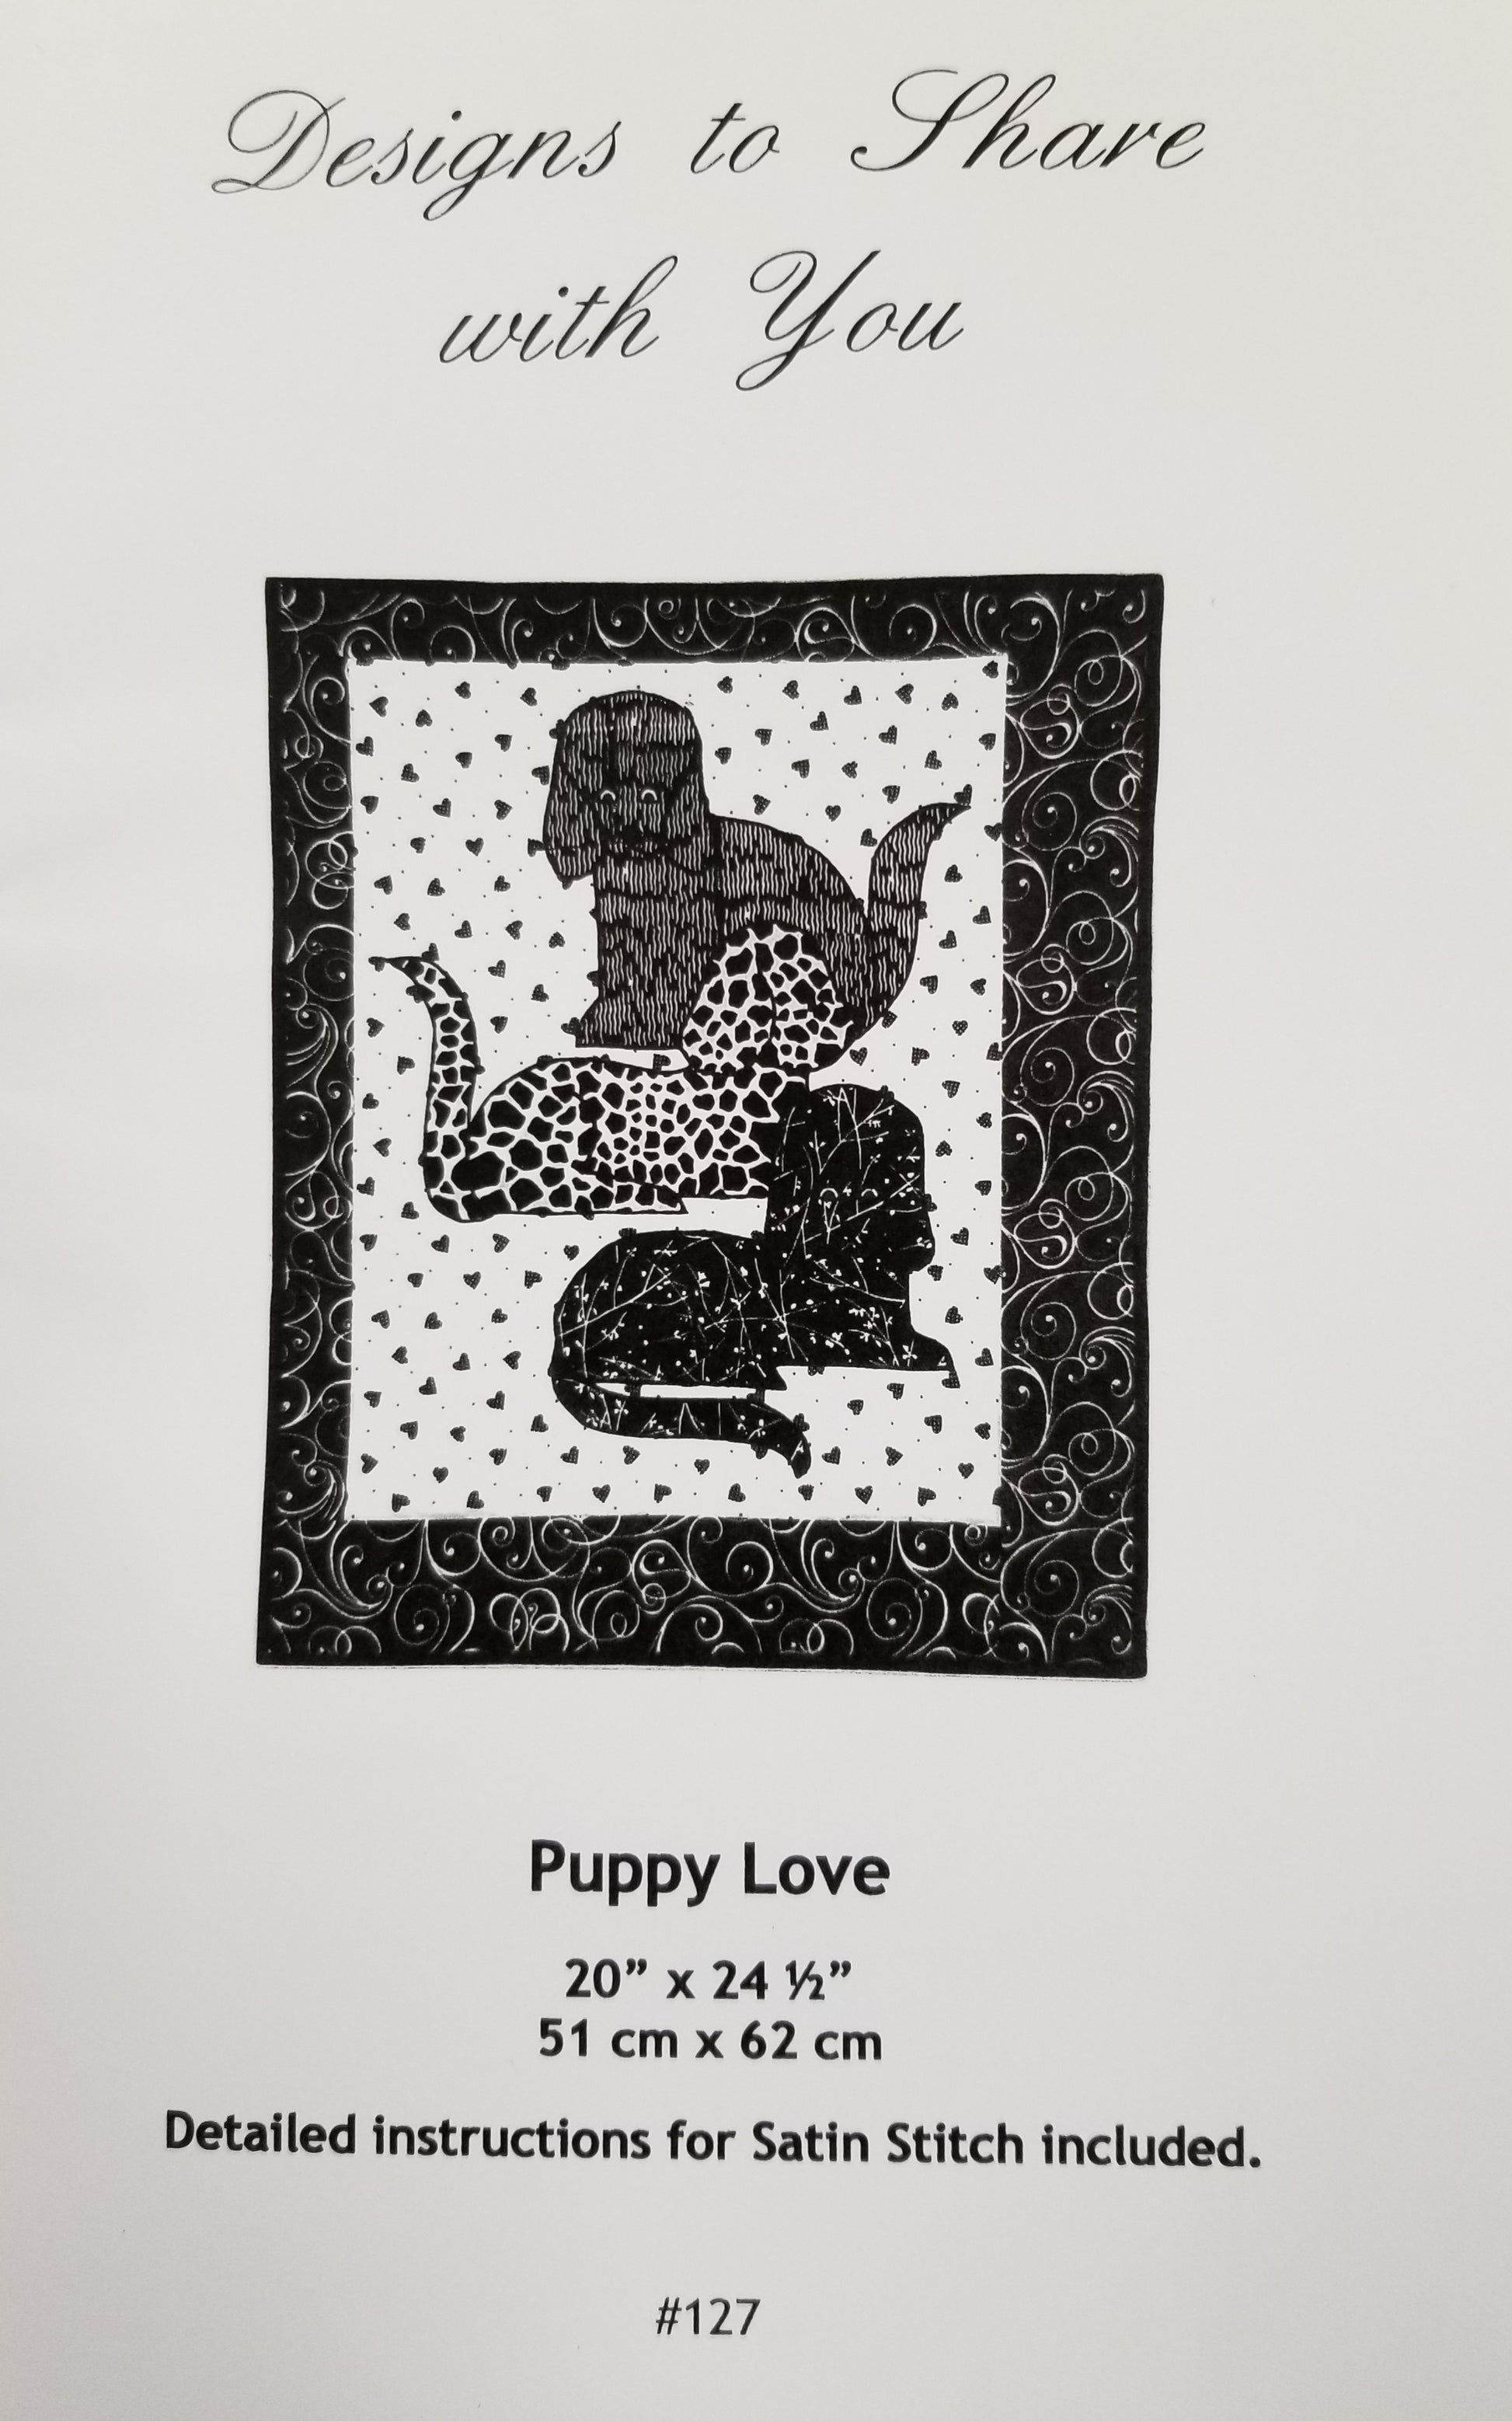 Puppy Love - Designs to Share with You